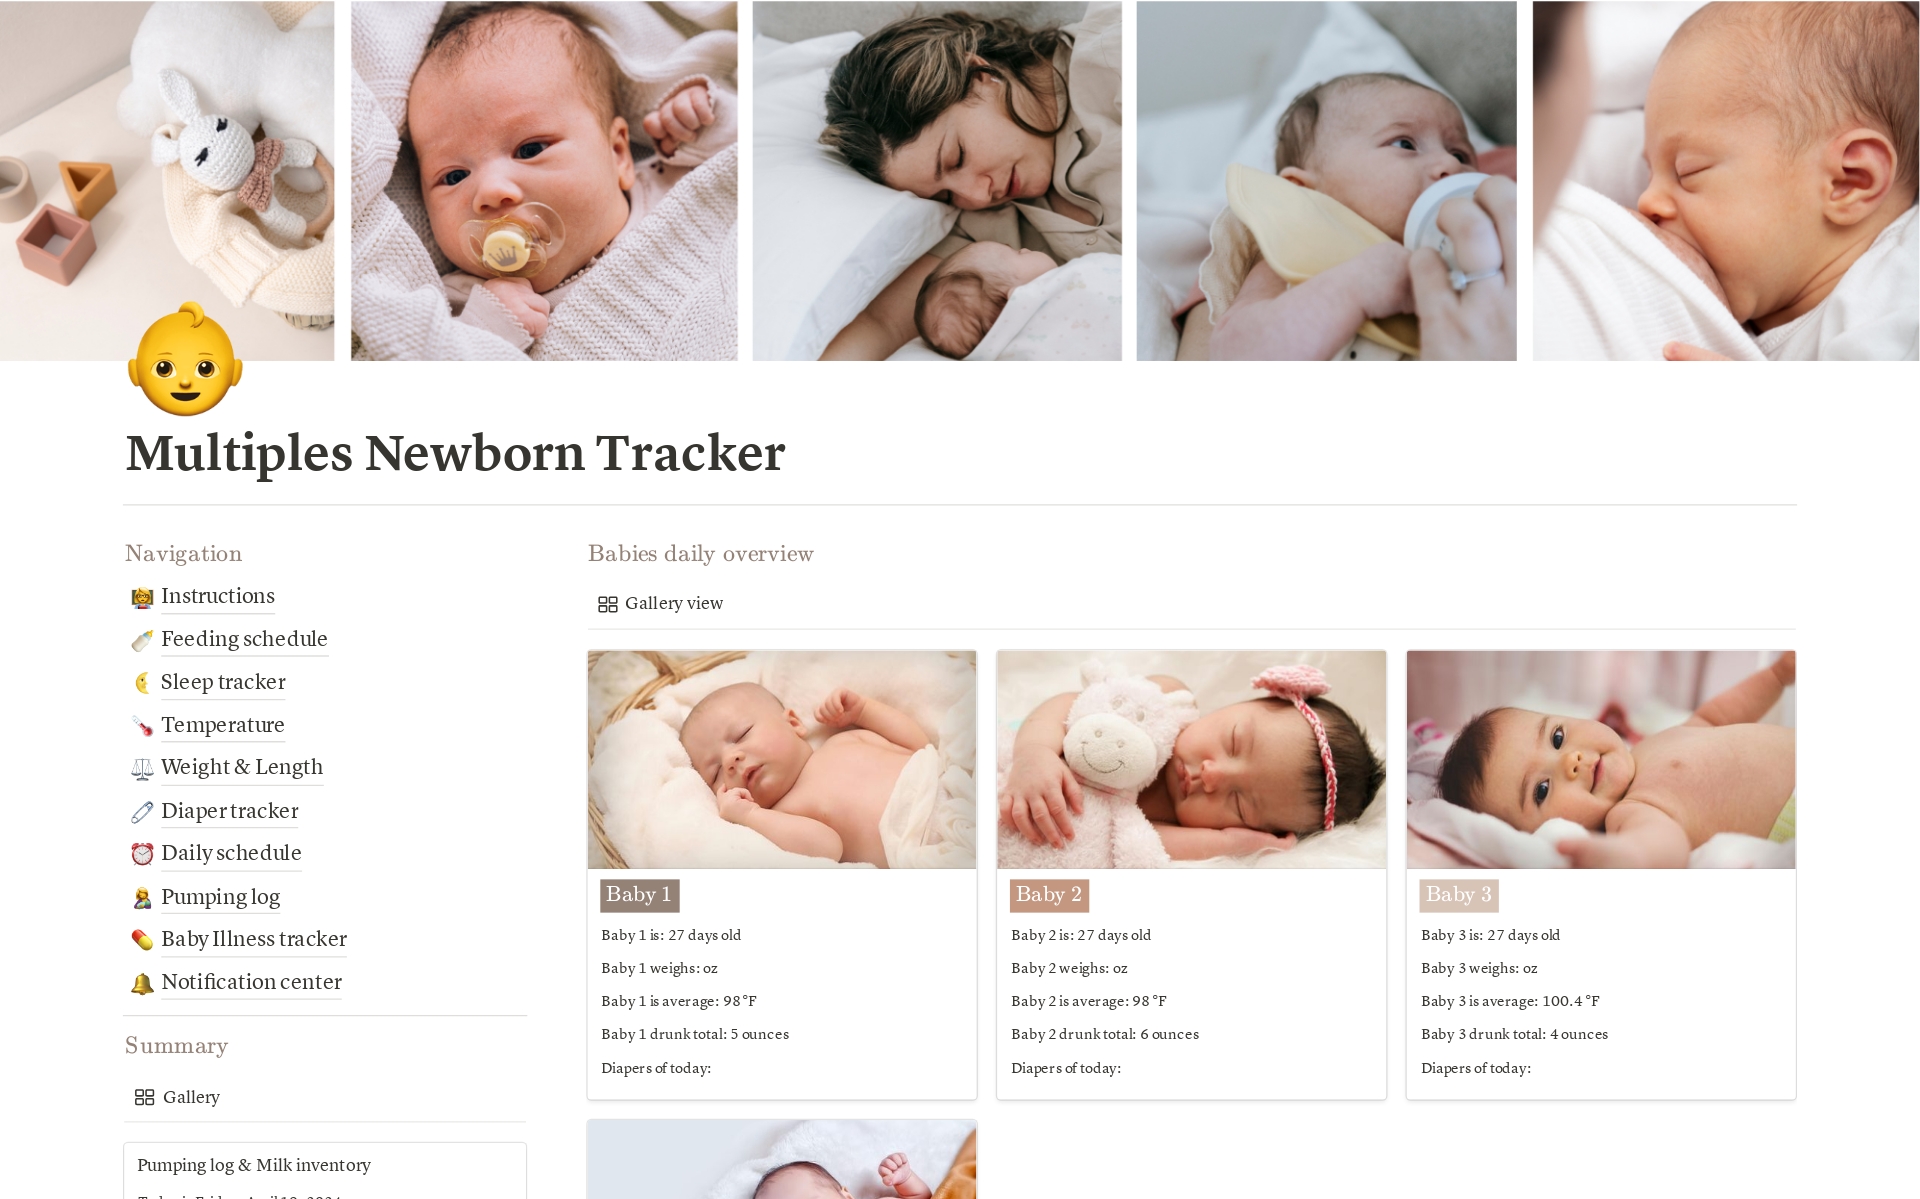 Say goodbye to the confusion and overwhelm of keeping track of multiple feeding schedules, diaper changes, sleep patterns, and more. With this intuitive app, managing the needs of your little ones has never been simpler.